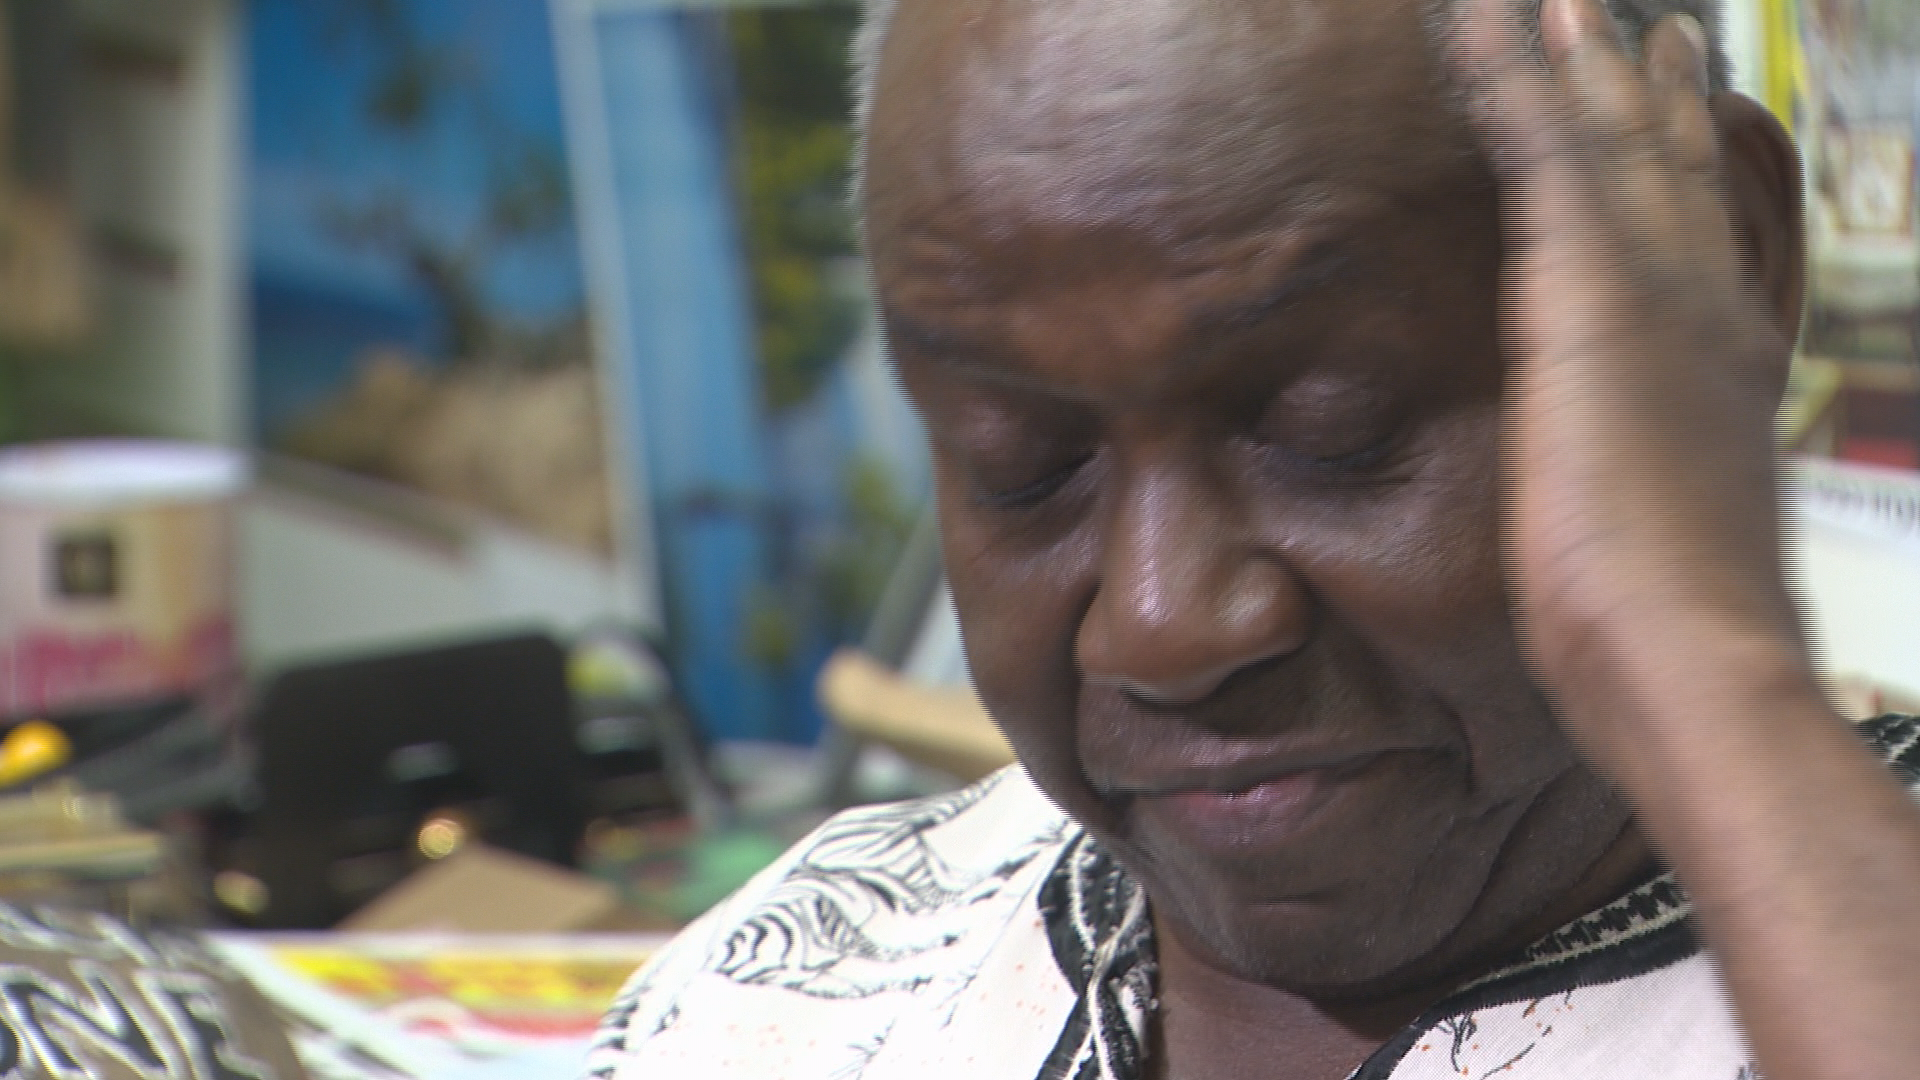 Toronto senior facing deportation allowed to stay in Canada after more than 20 years